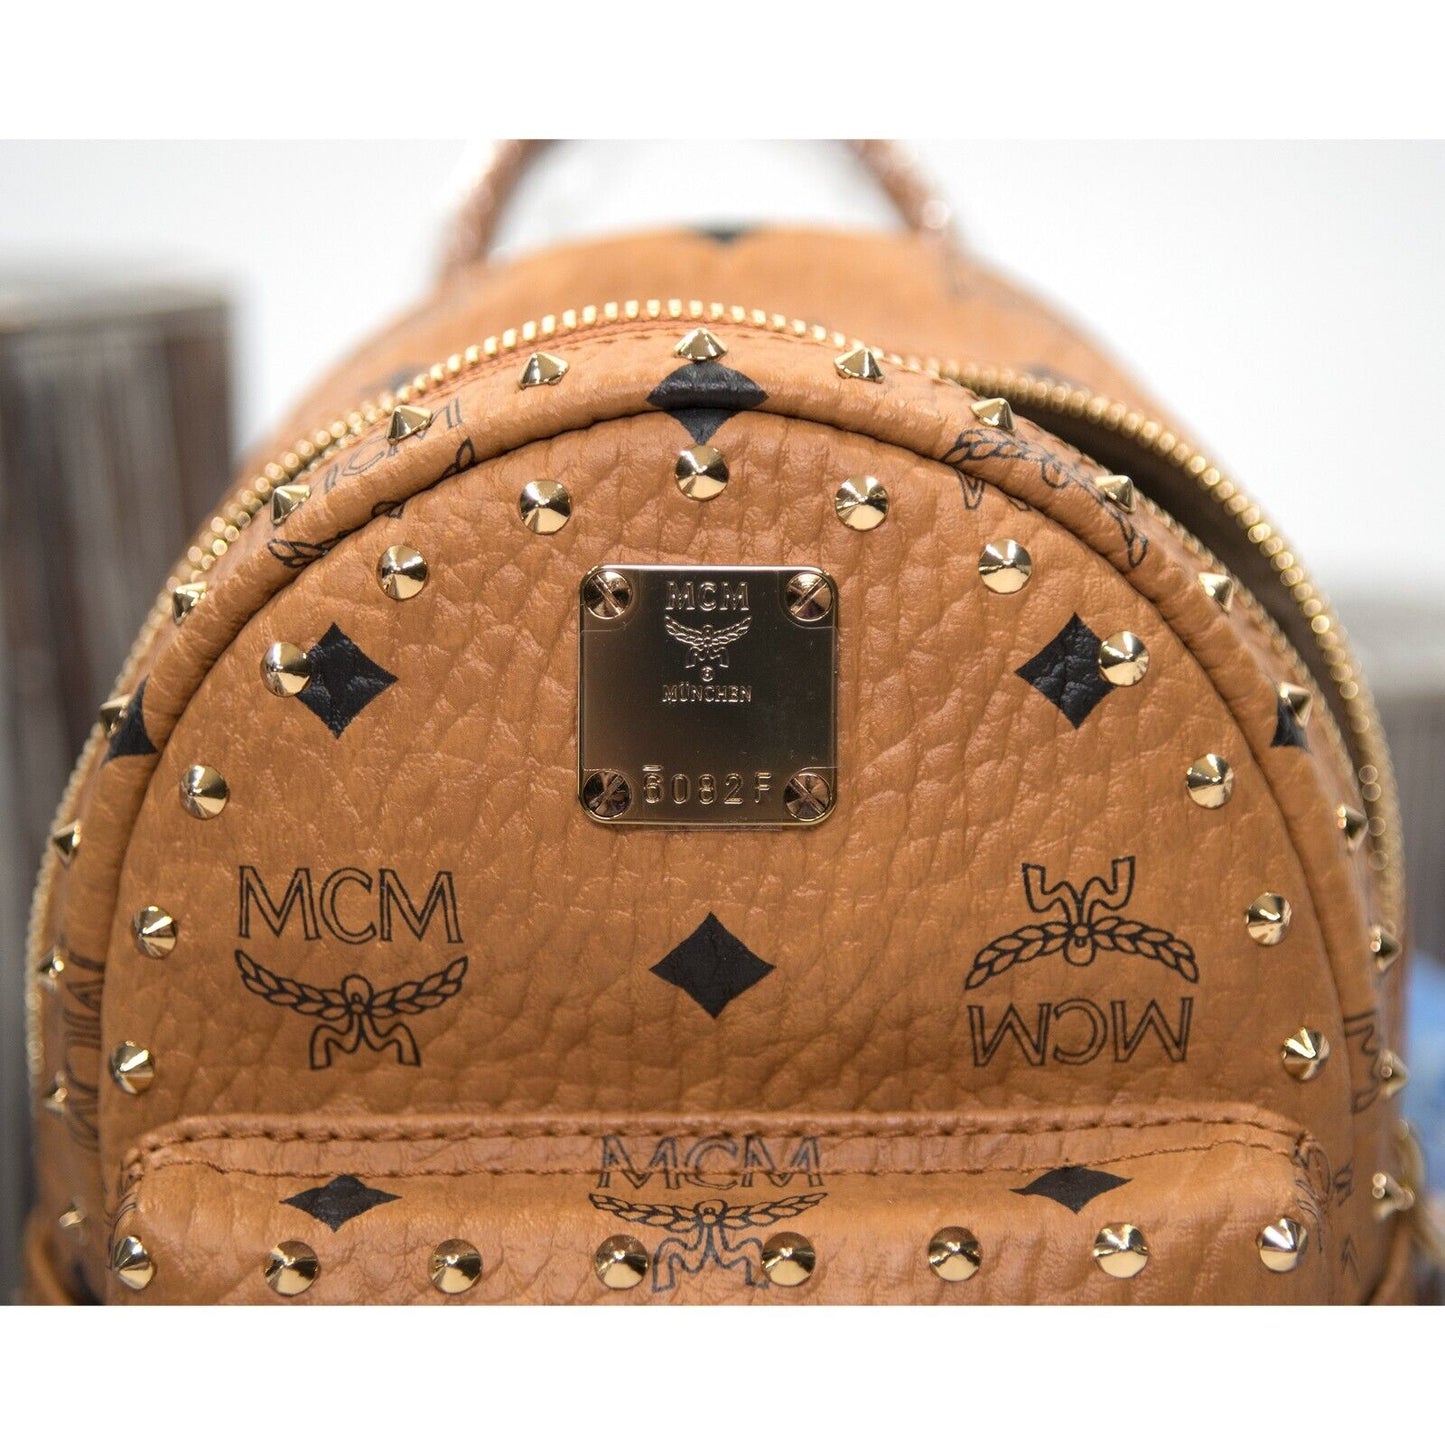 MCM Cognac Studded Viisetos Leather MINI Backpack Book Bag NWT